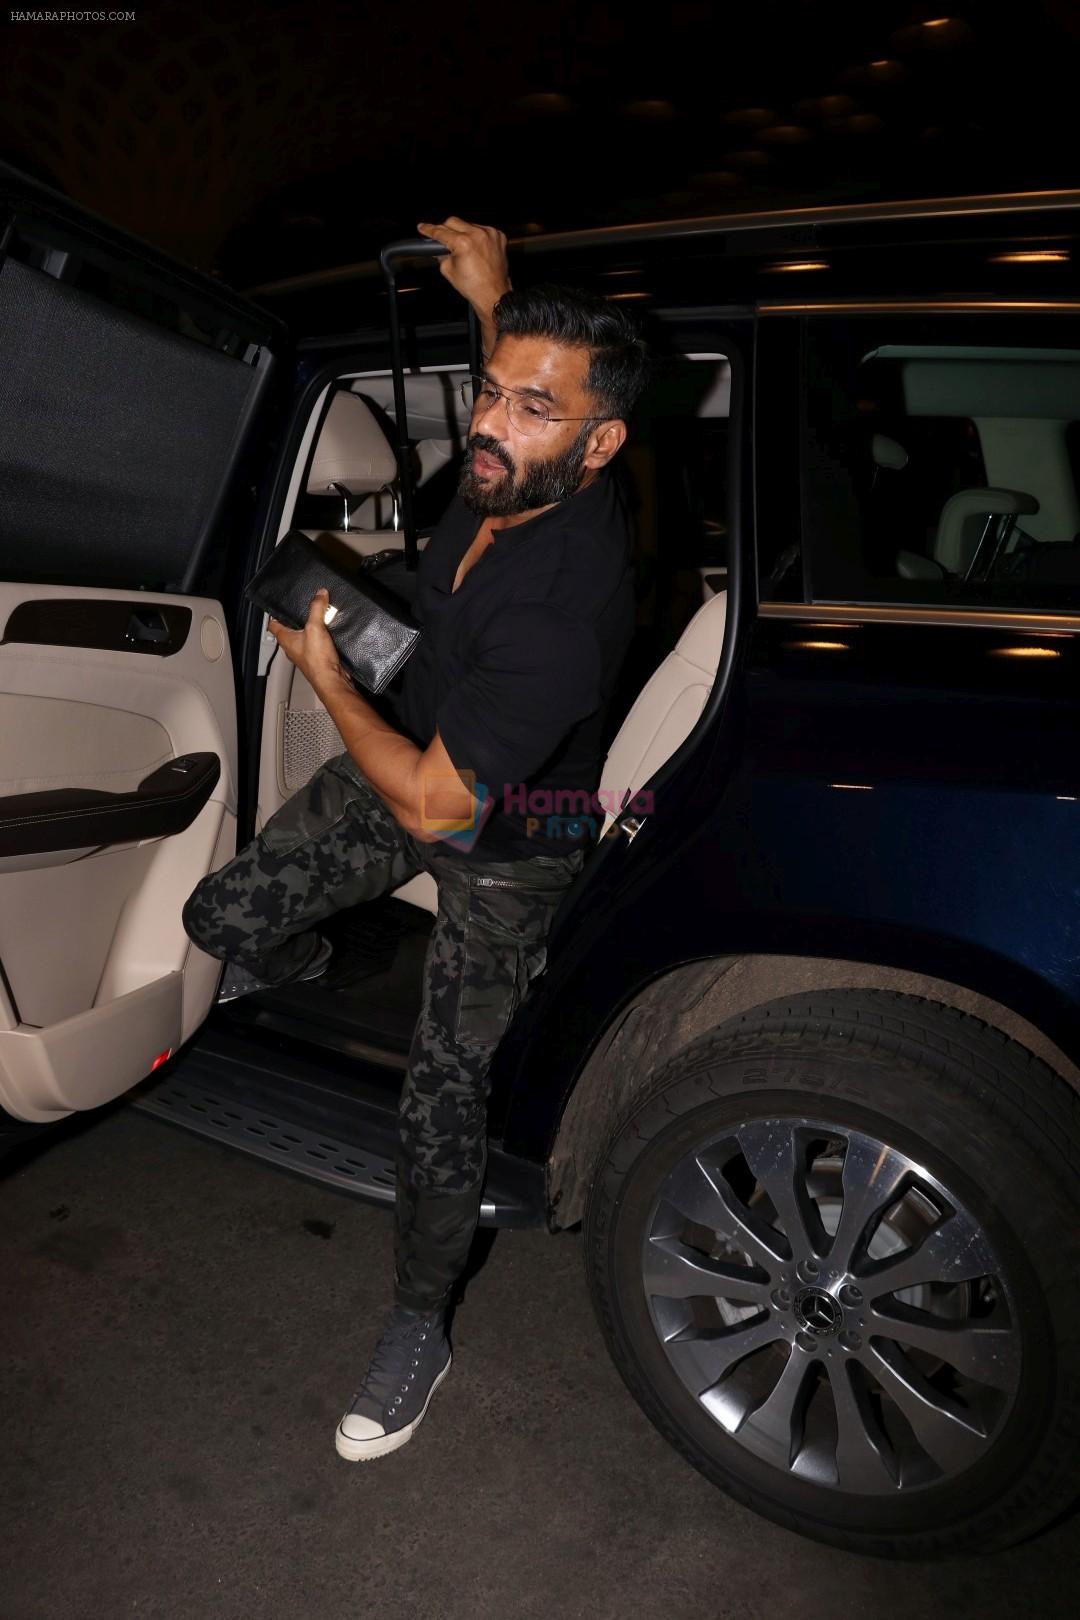 Suniel Shetty snapped in Mumbai airport leaving For IIFA which will held in New York on 11th July 2017